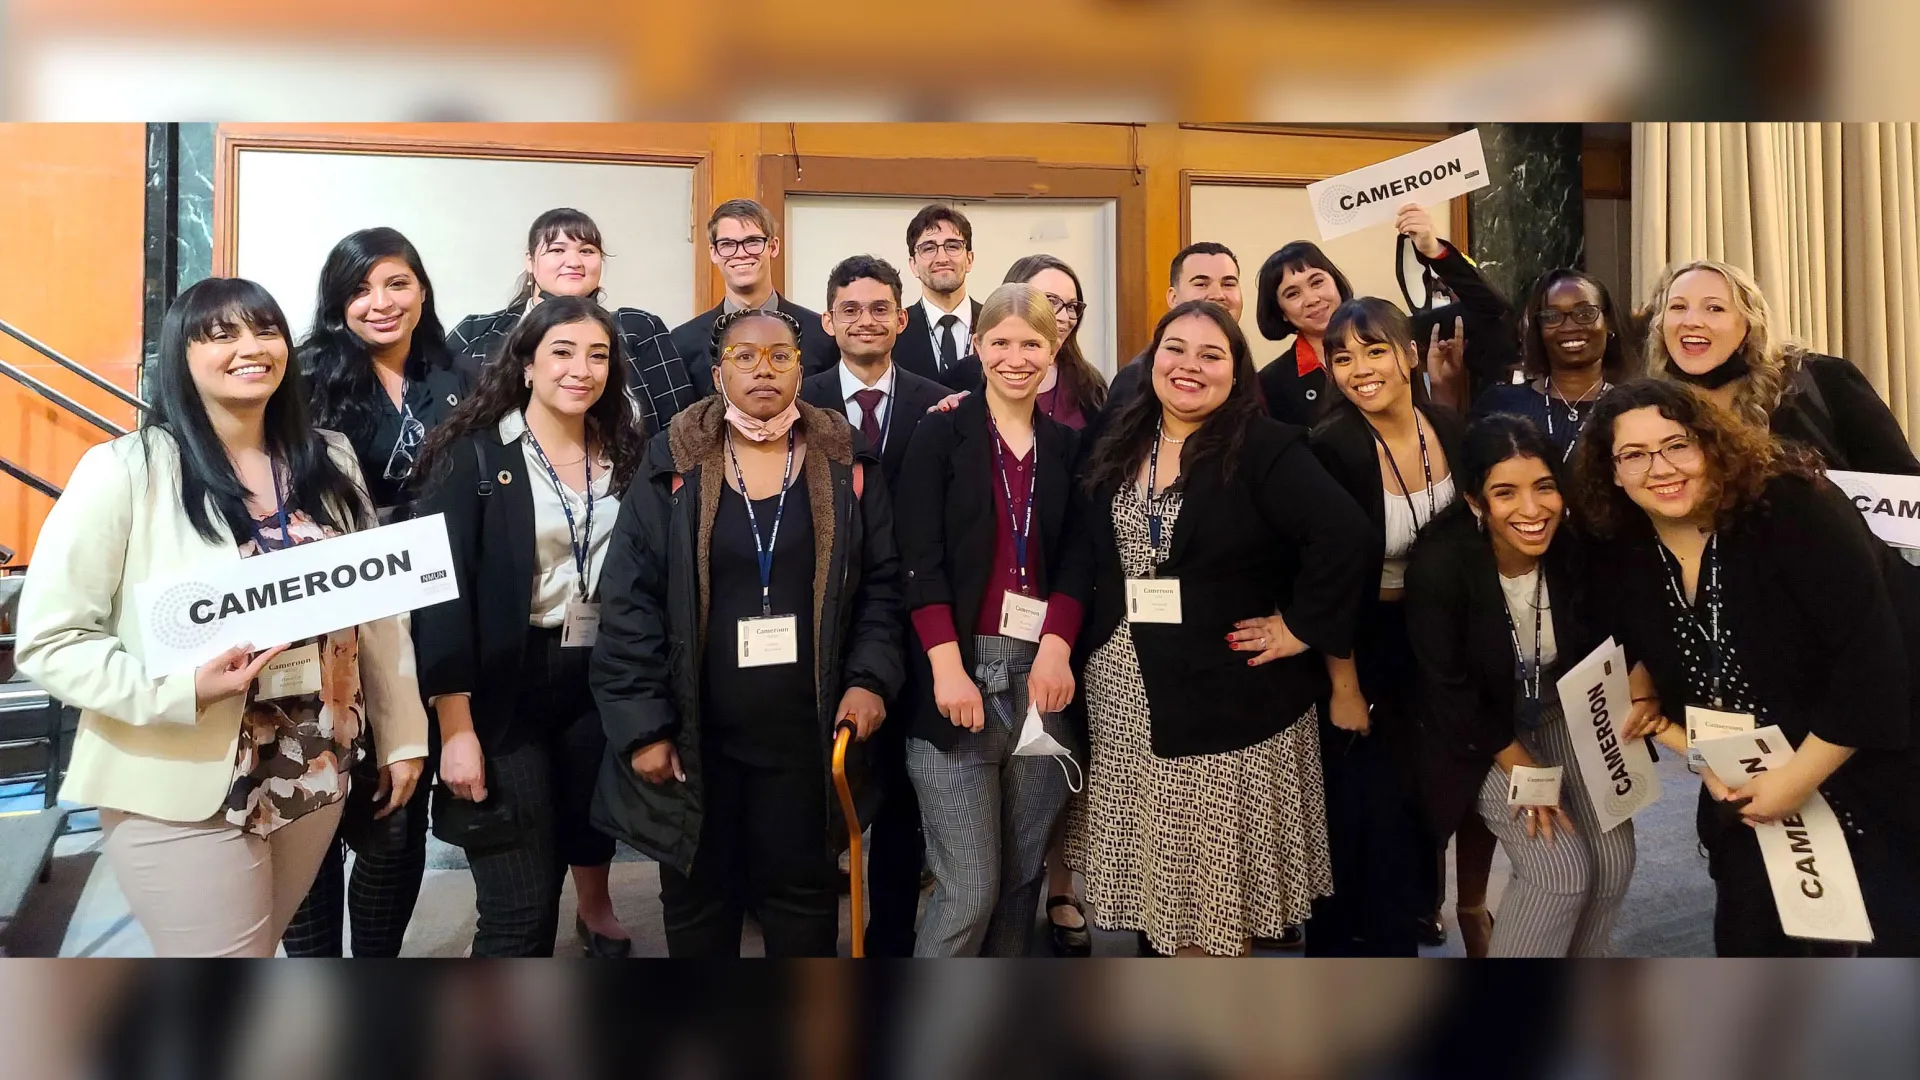 CSUSB’s Model United Nations team again earned top honors at the recent National Model United Nations Conference in New York City, and given its long track record of excellence, solidifying the university’s program among the best in the world.